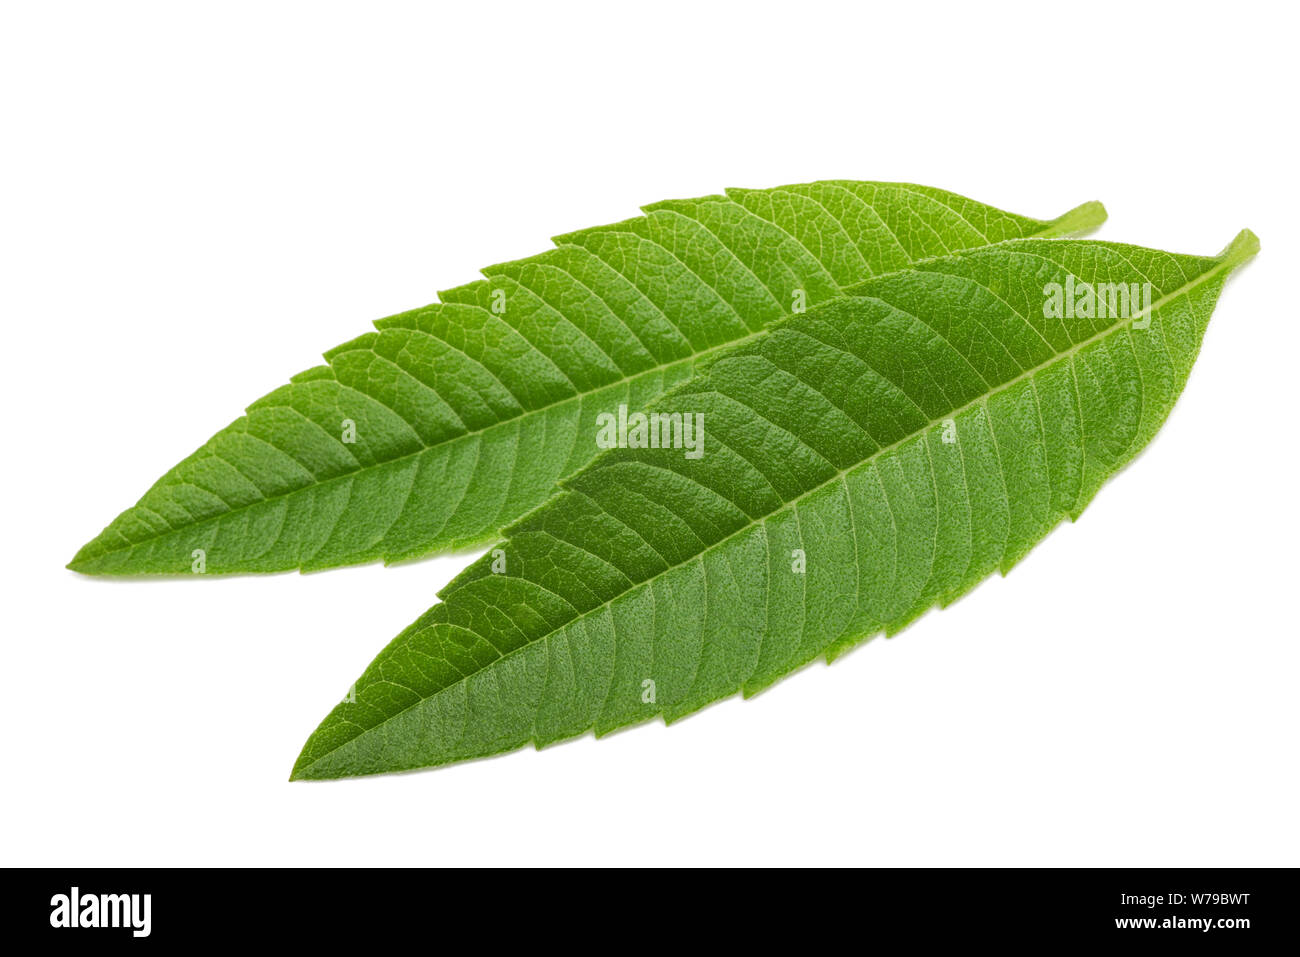 Louisa herb leaves (beebrush) isolated on white background Stock Photo